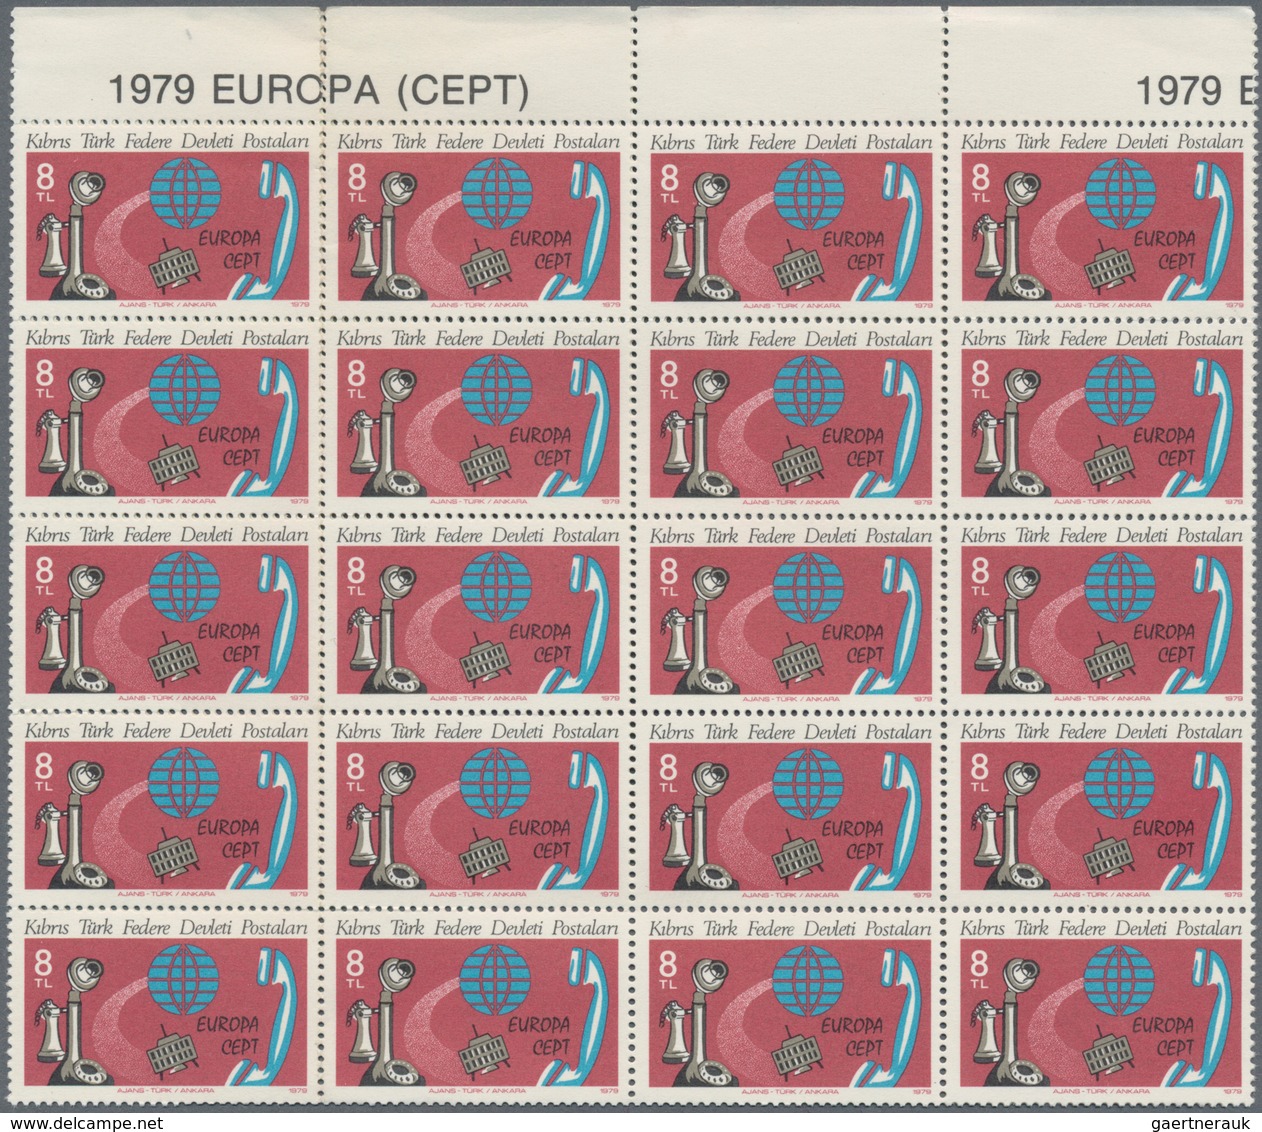 Thematik: Marke Auf Marke / Stamp On Stamp: 1979, Europa CEPT Stamps Of Faroe Islands And Northern C - Timbres Sur Timbres